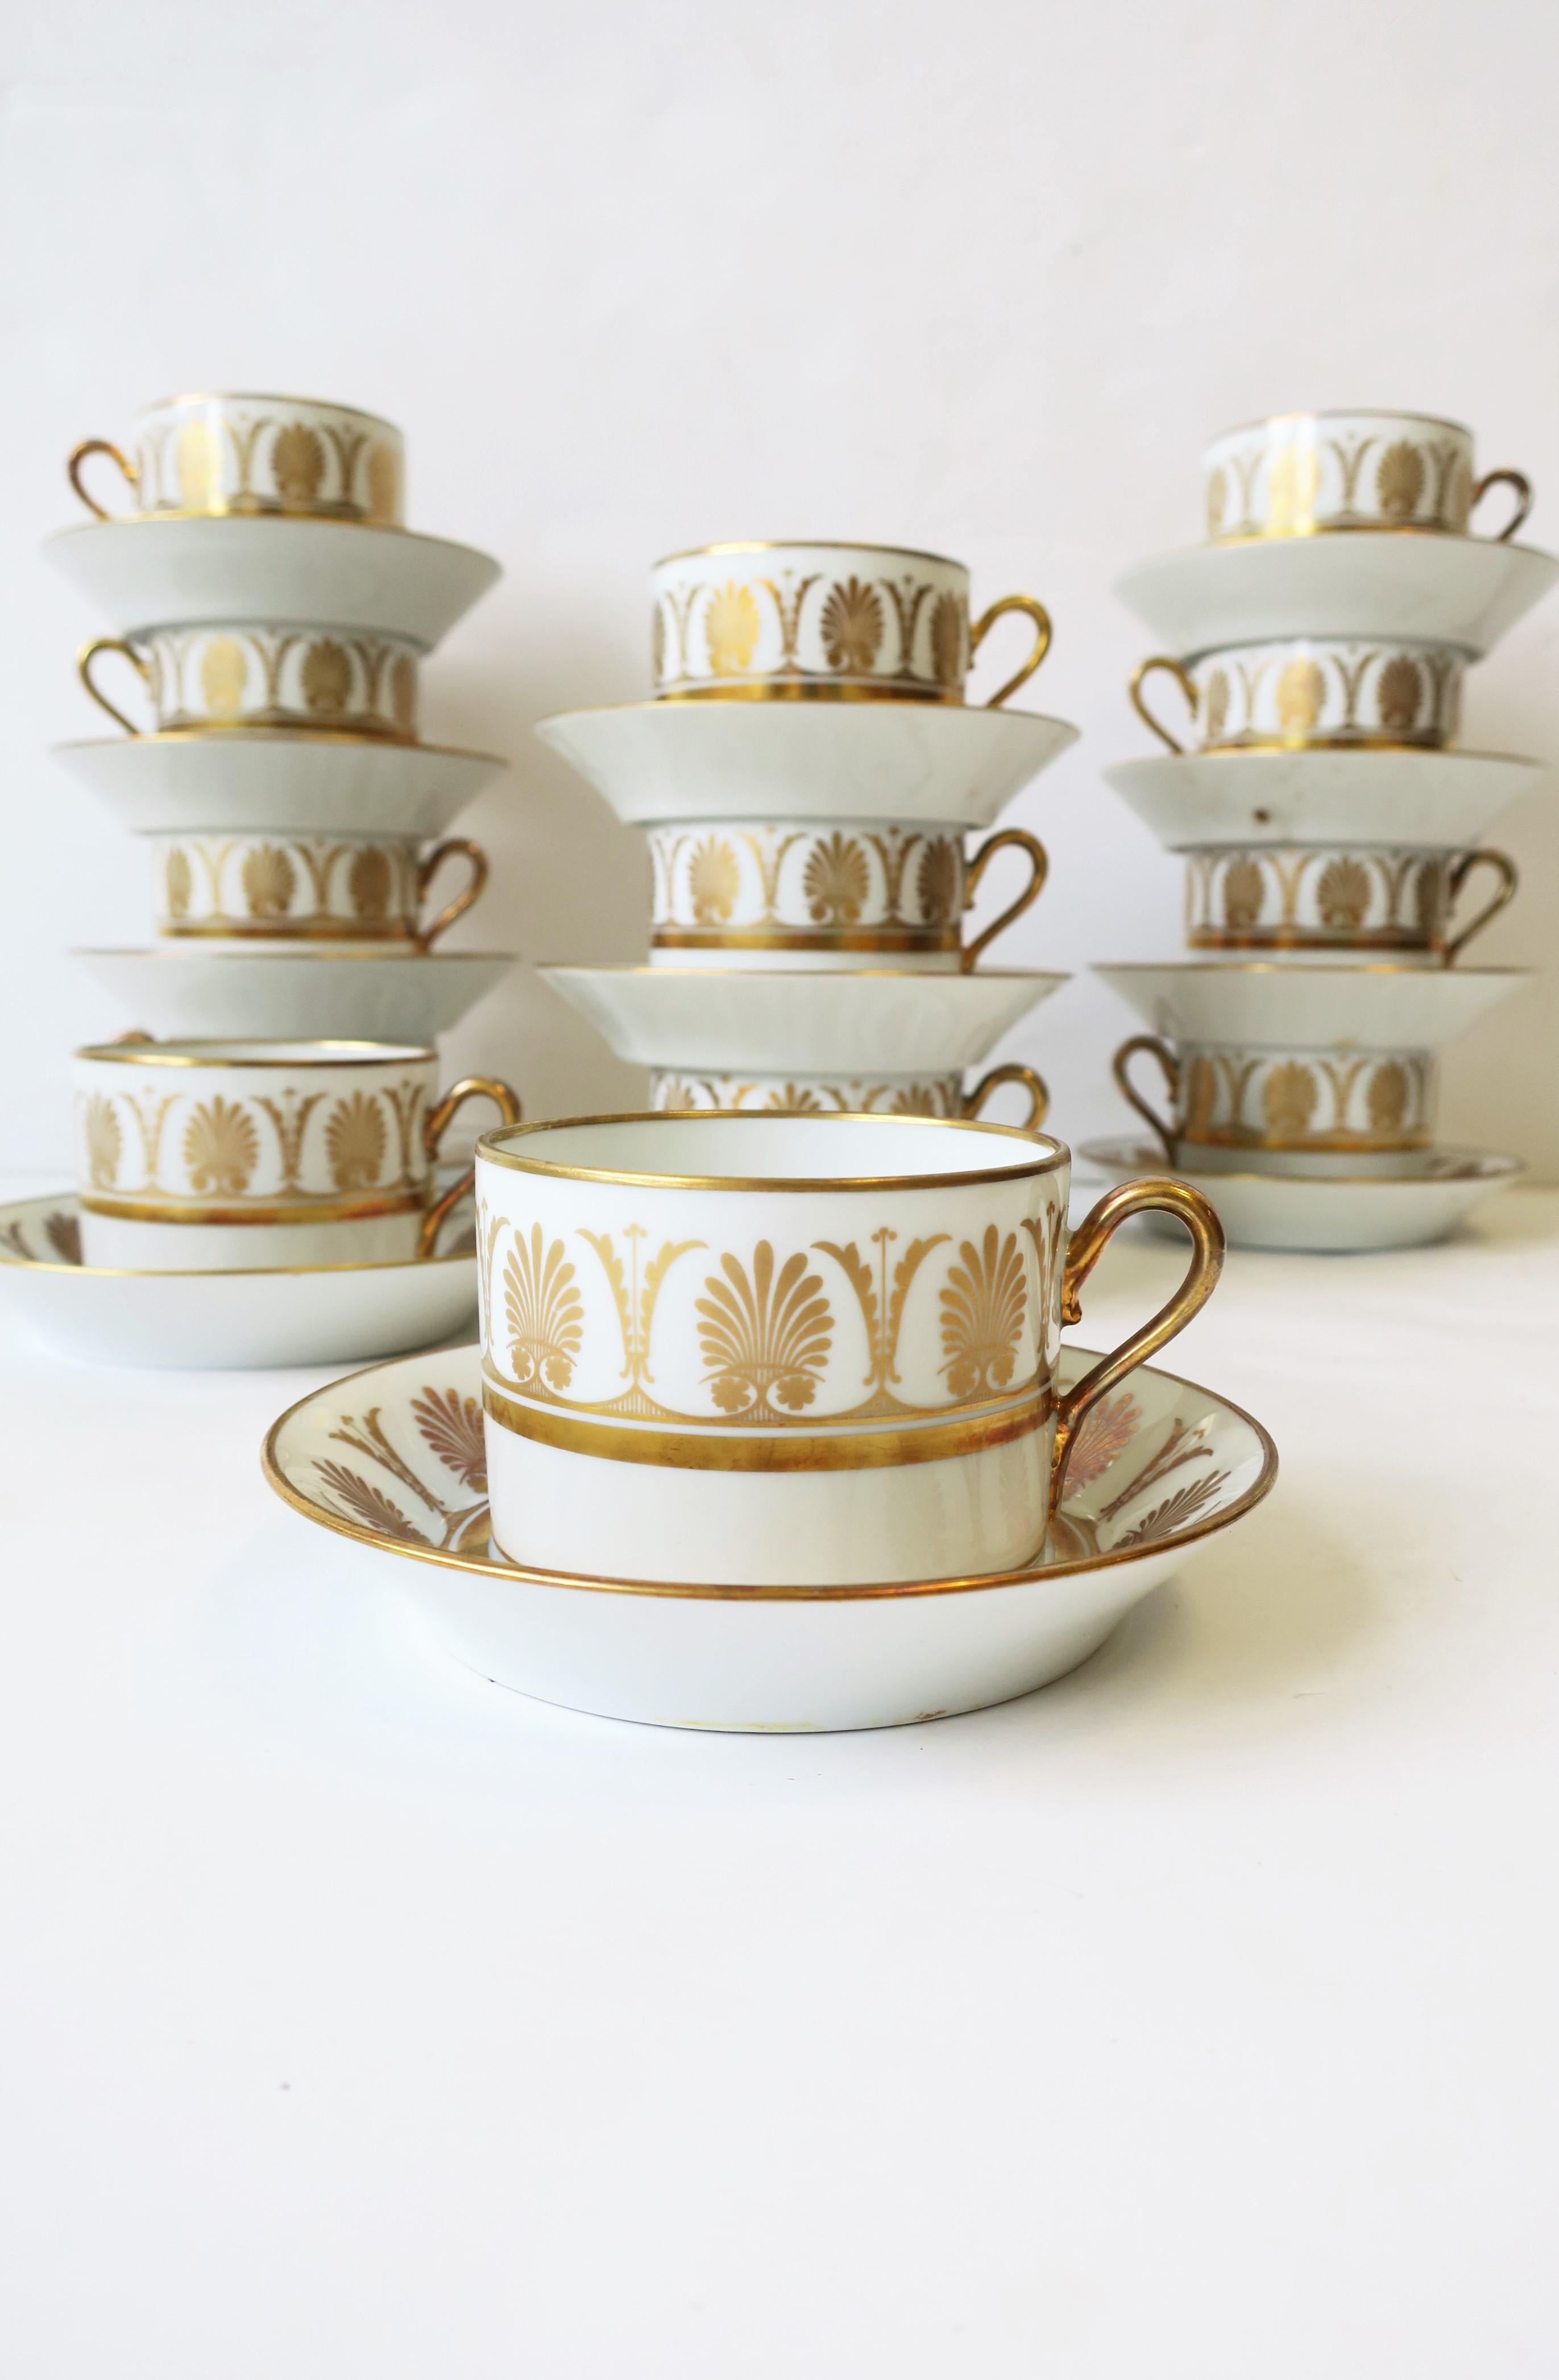 Richard Ginori Vintage Italian White & Gold Coffee or Tea Cup Saucer, Set of 12 For Sale 2